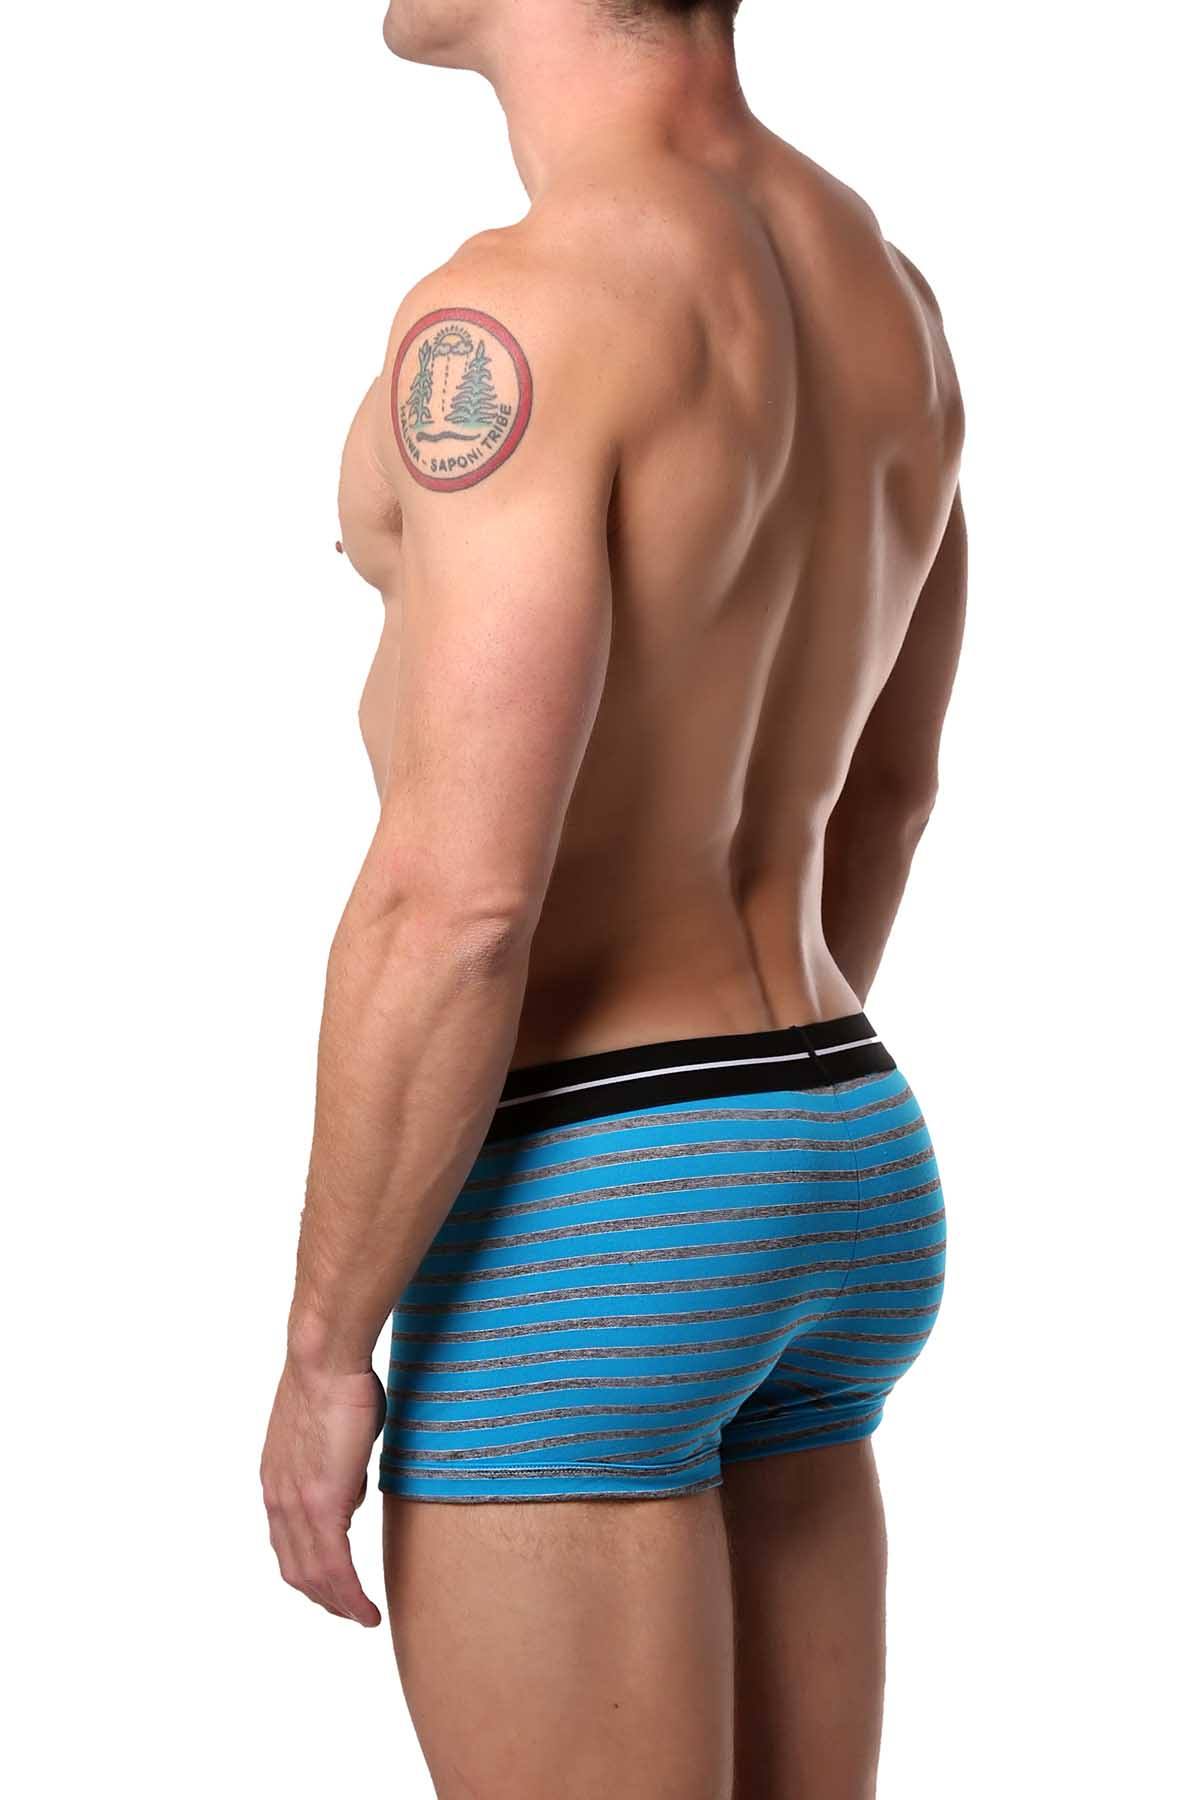 Papi Turquoise/Black/White Solid/Striped Brazilian Trunk 3-Pack